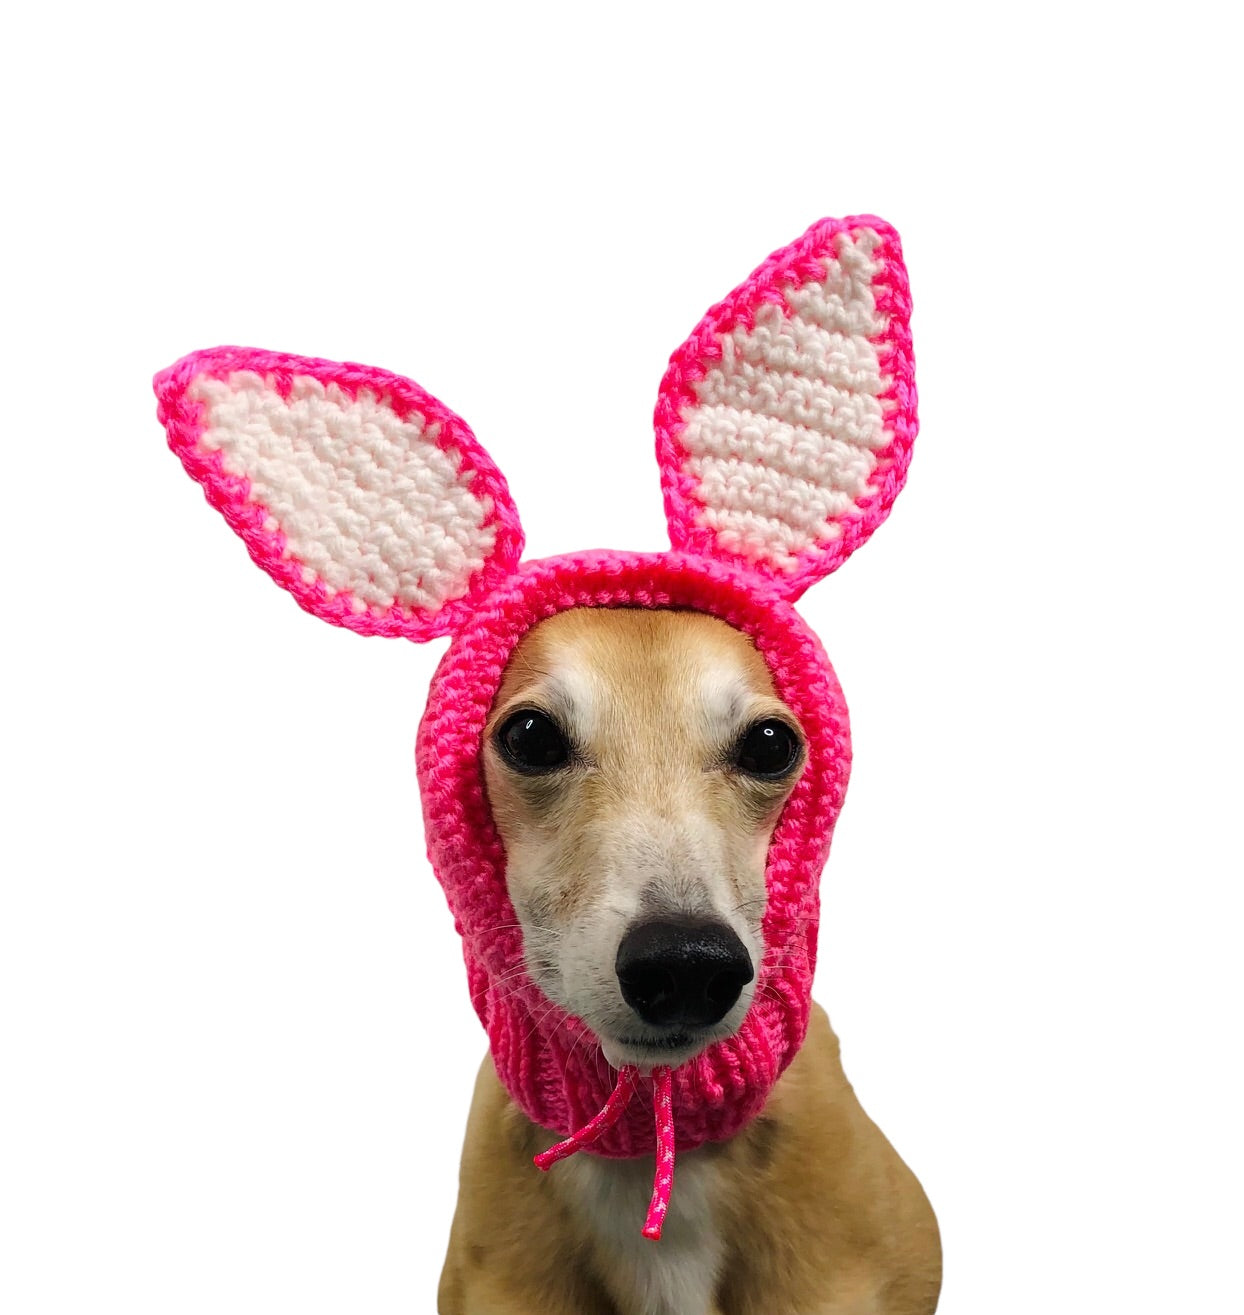 Hot Pink Knitted Bunny Ear Hat